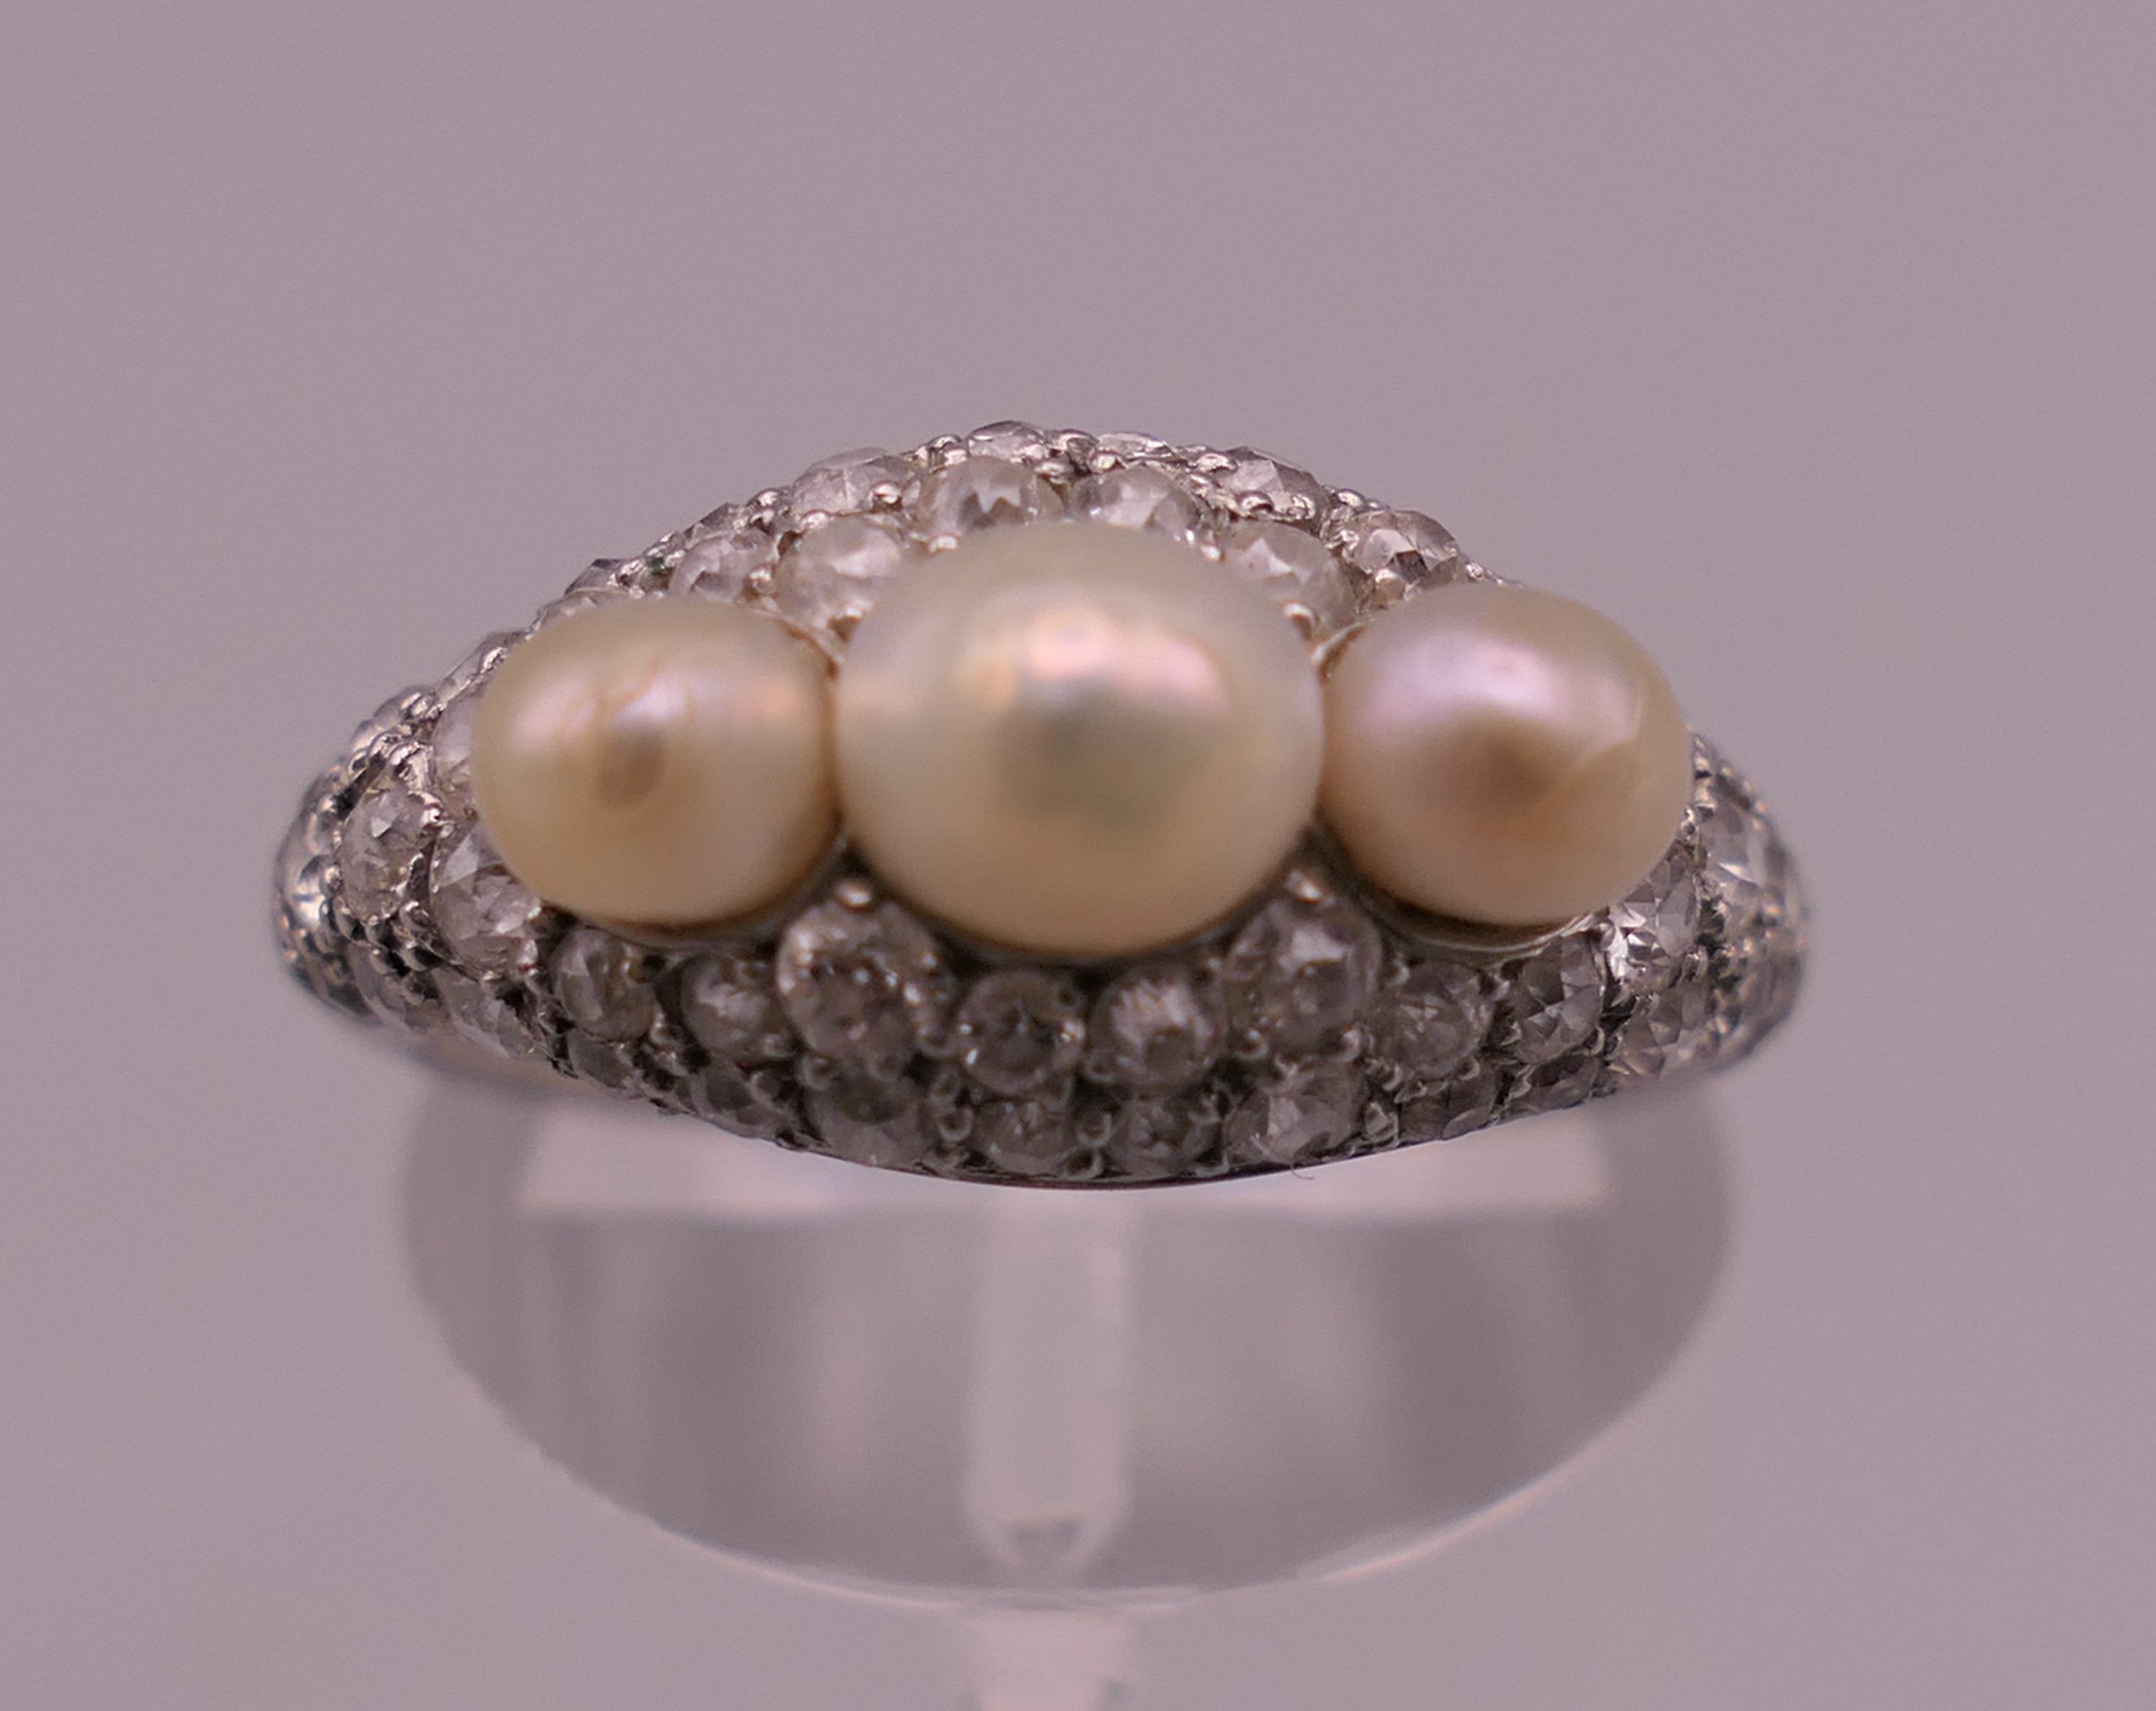 An unmarked white gold or platinum diamond and pearl ring. Ring size I/J. 5.6 grammes total weight.